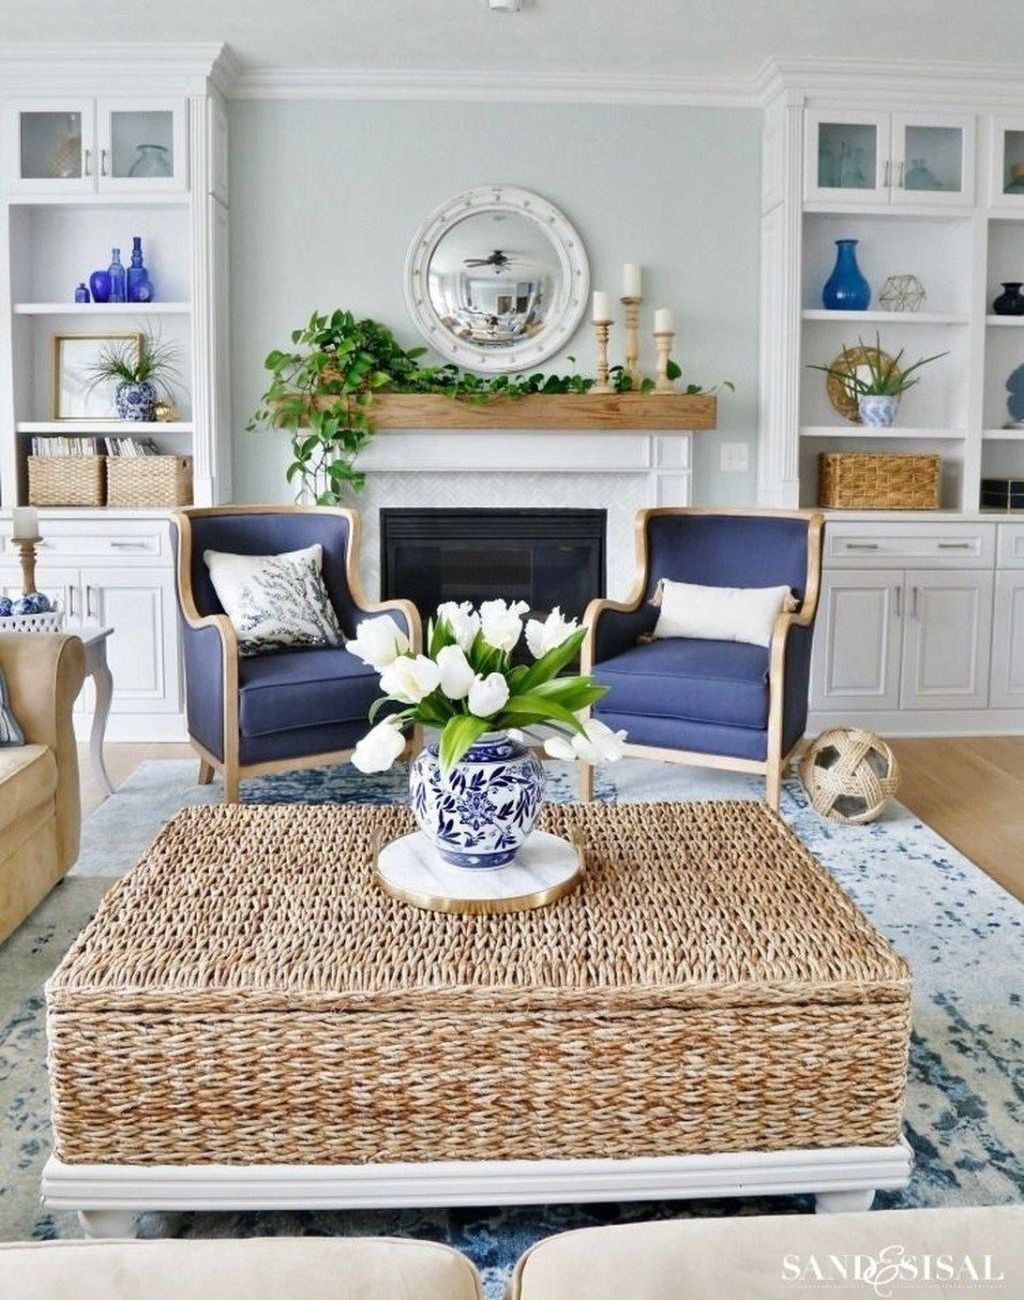 Superb Living Room Decor Ideas For Spring To Try Soon 19